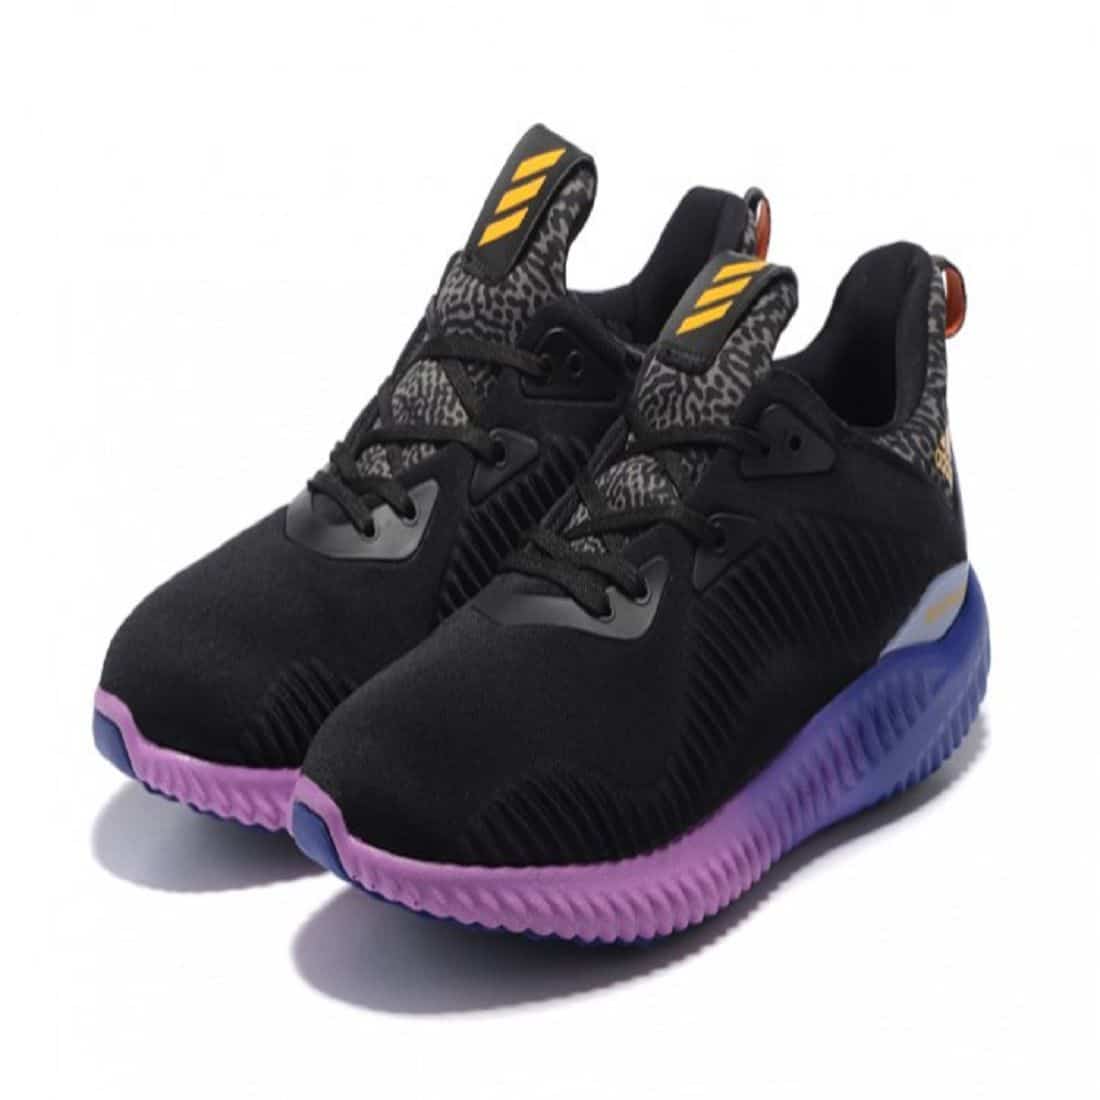 Adidas Alphabounce Purple Running Shoes